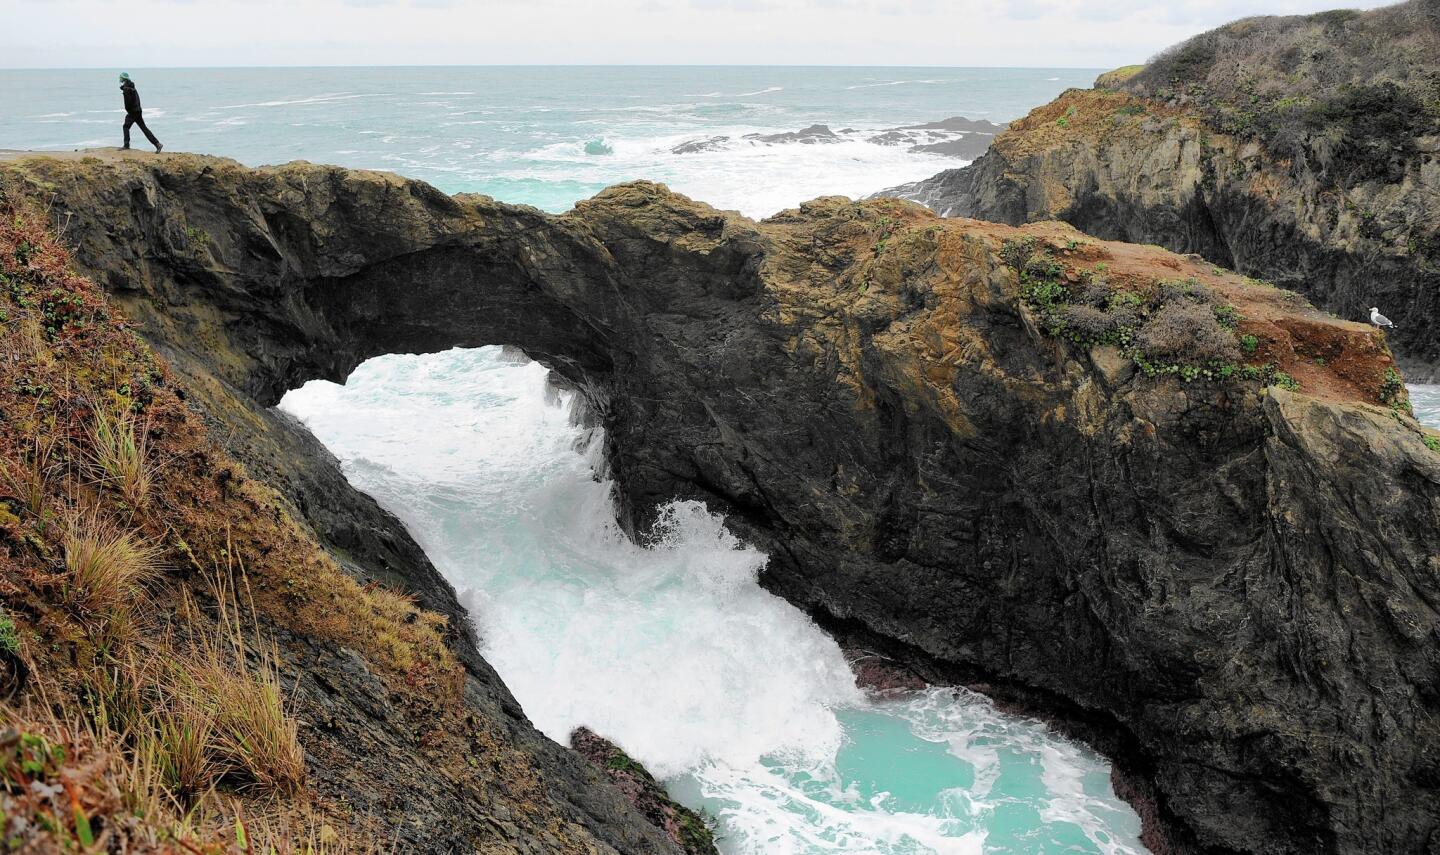 Seaside cliff walks to explore rock formations on the Pacific coast are among the many reasons to visit Mendocino.